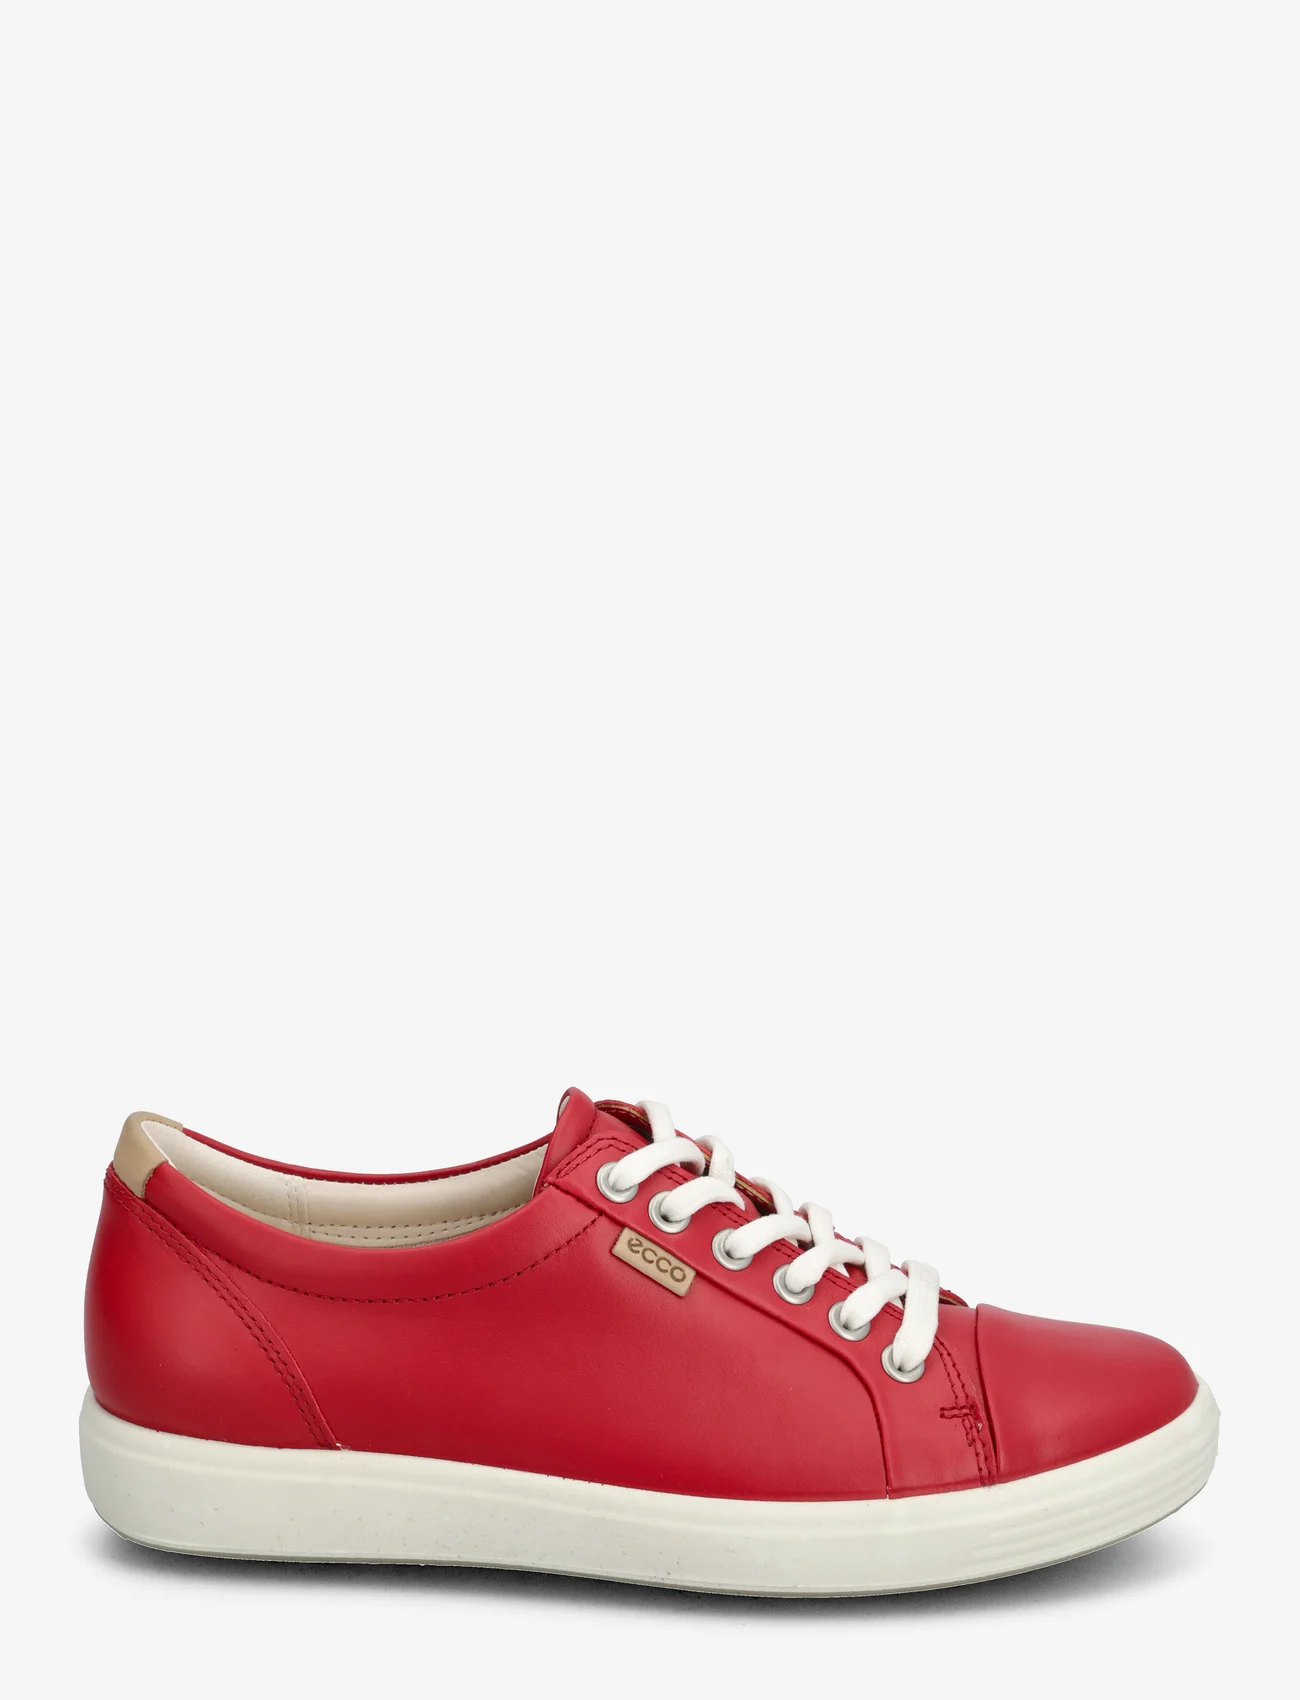 ECCO - SOFT 7 W - low top sneakers - chili red - 1